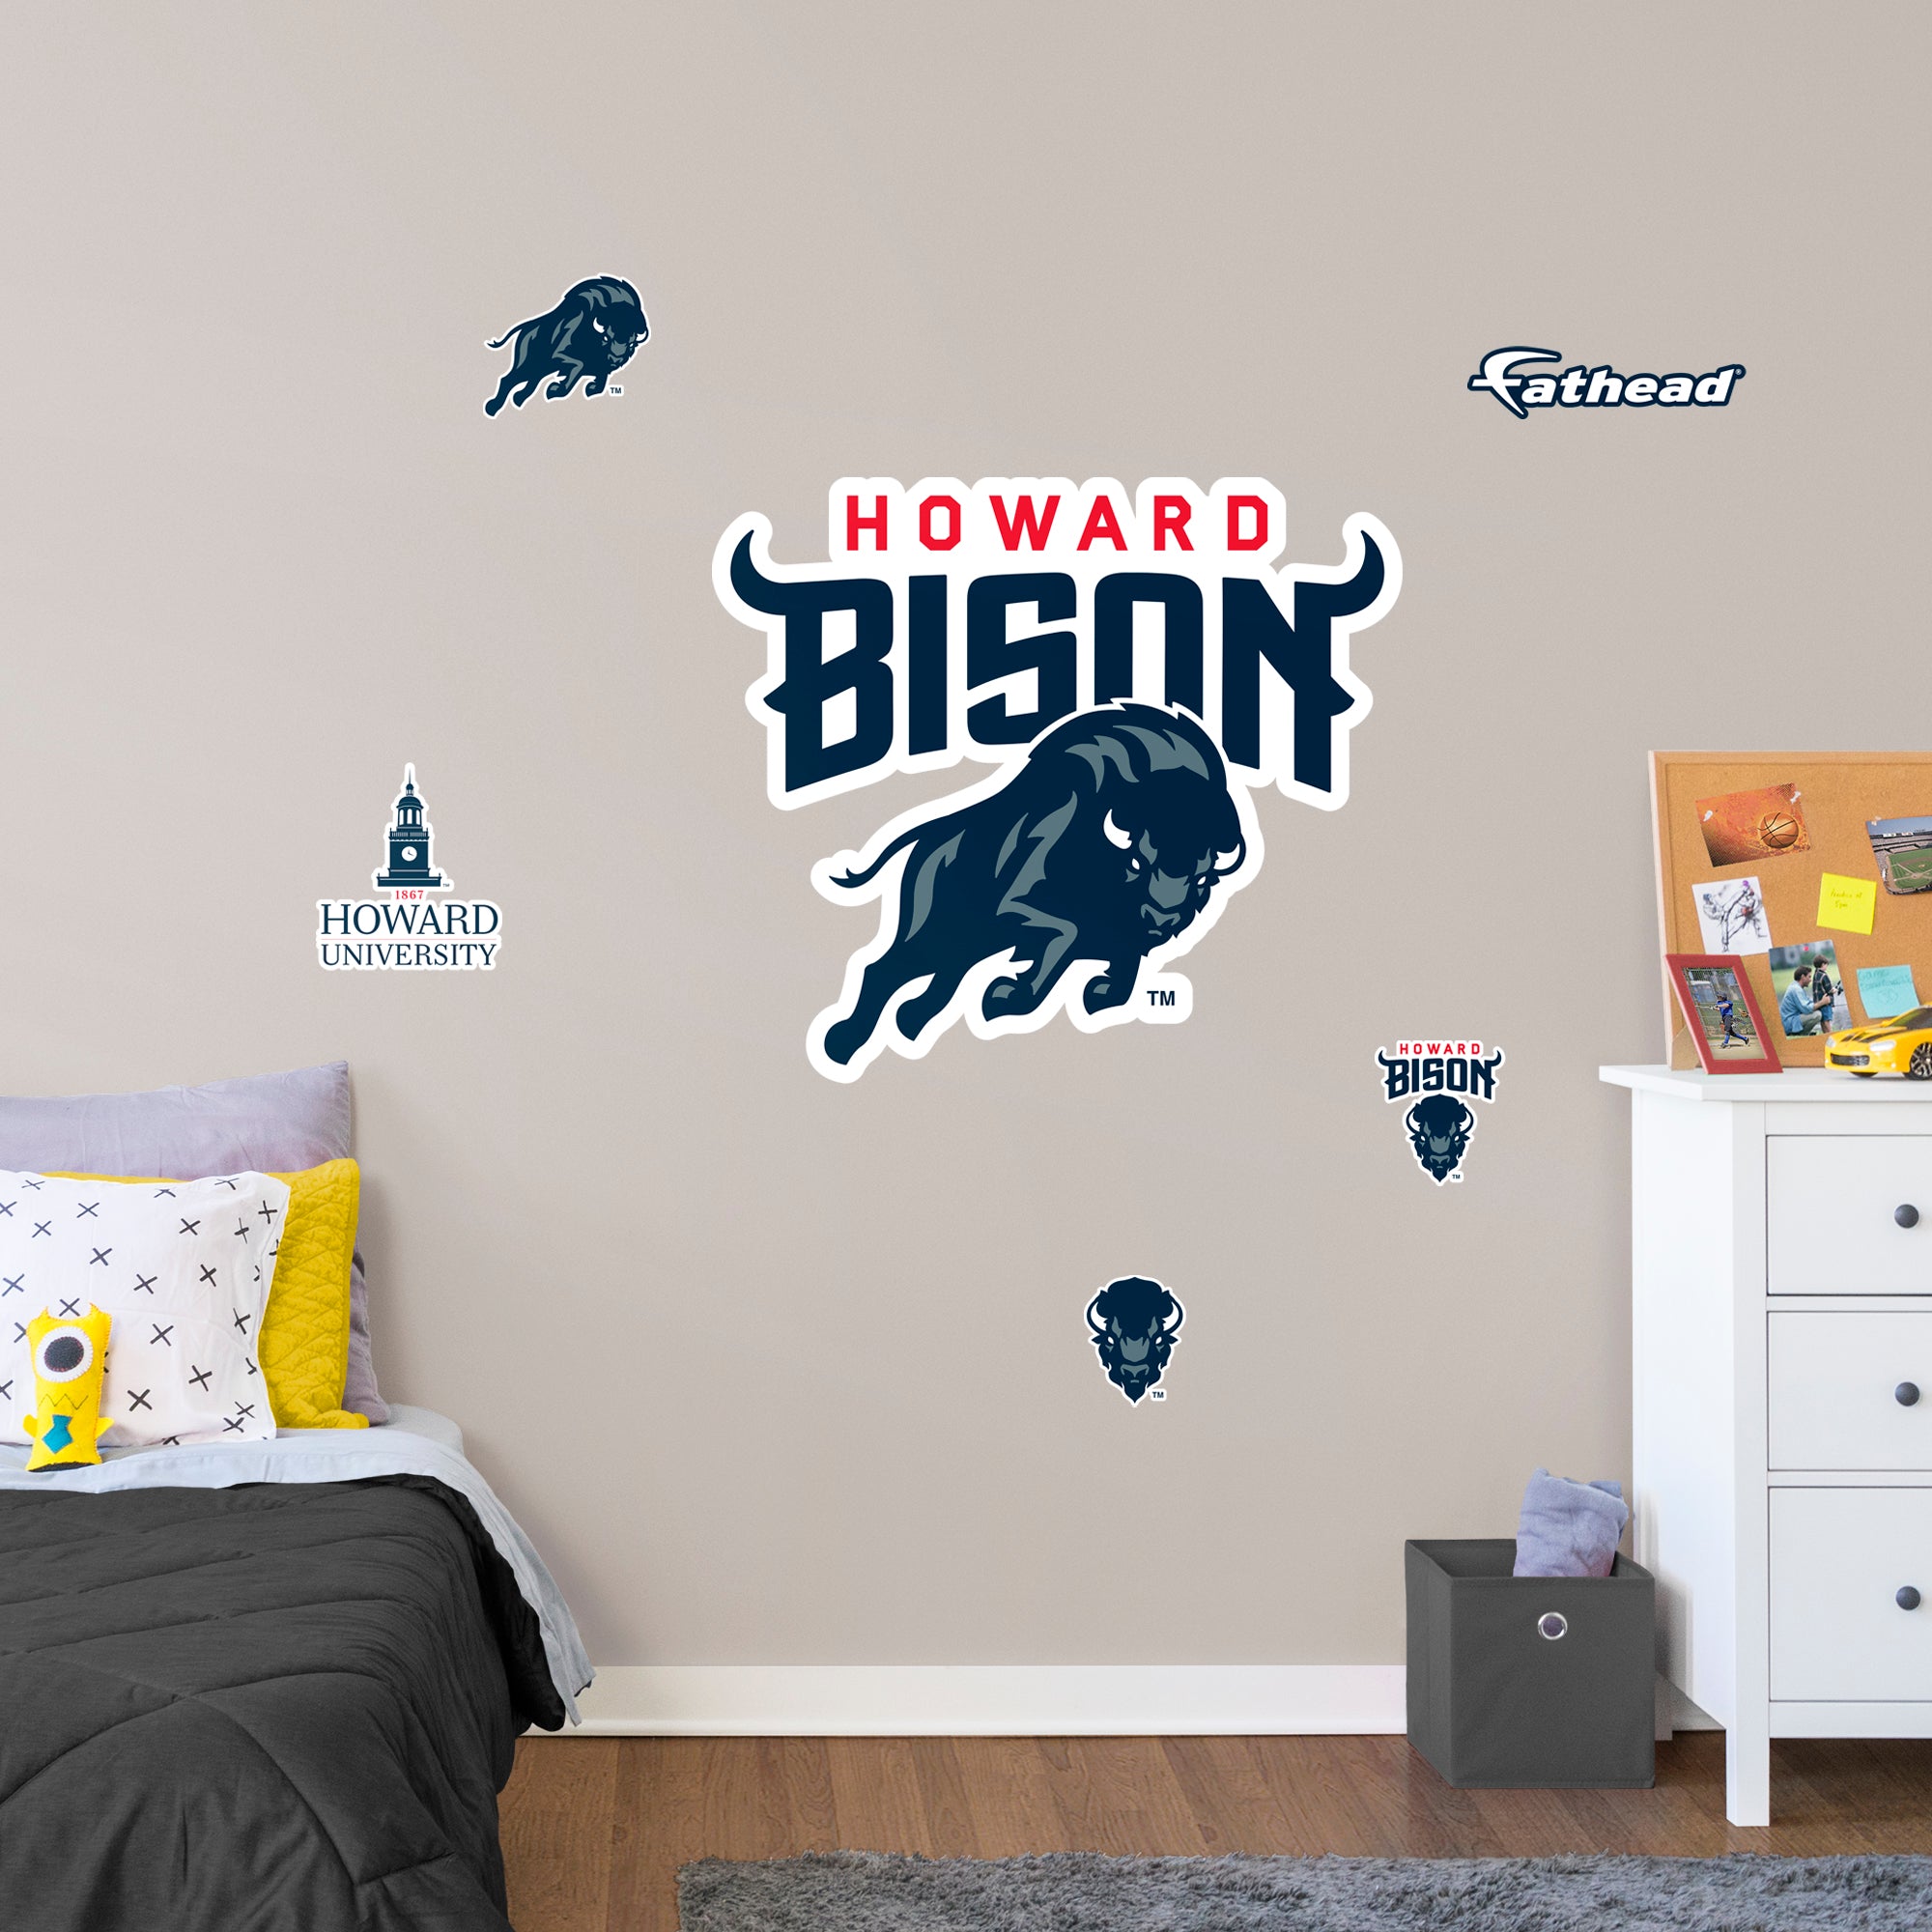 Howard University RealBig Logo - Officially Licensed NCAA Removable Wall Decal Giant Decal (35"W x 40"H) by Fathead | Vinyl